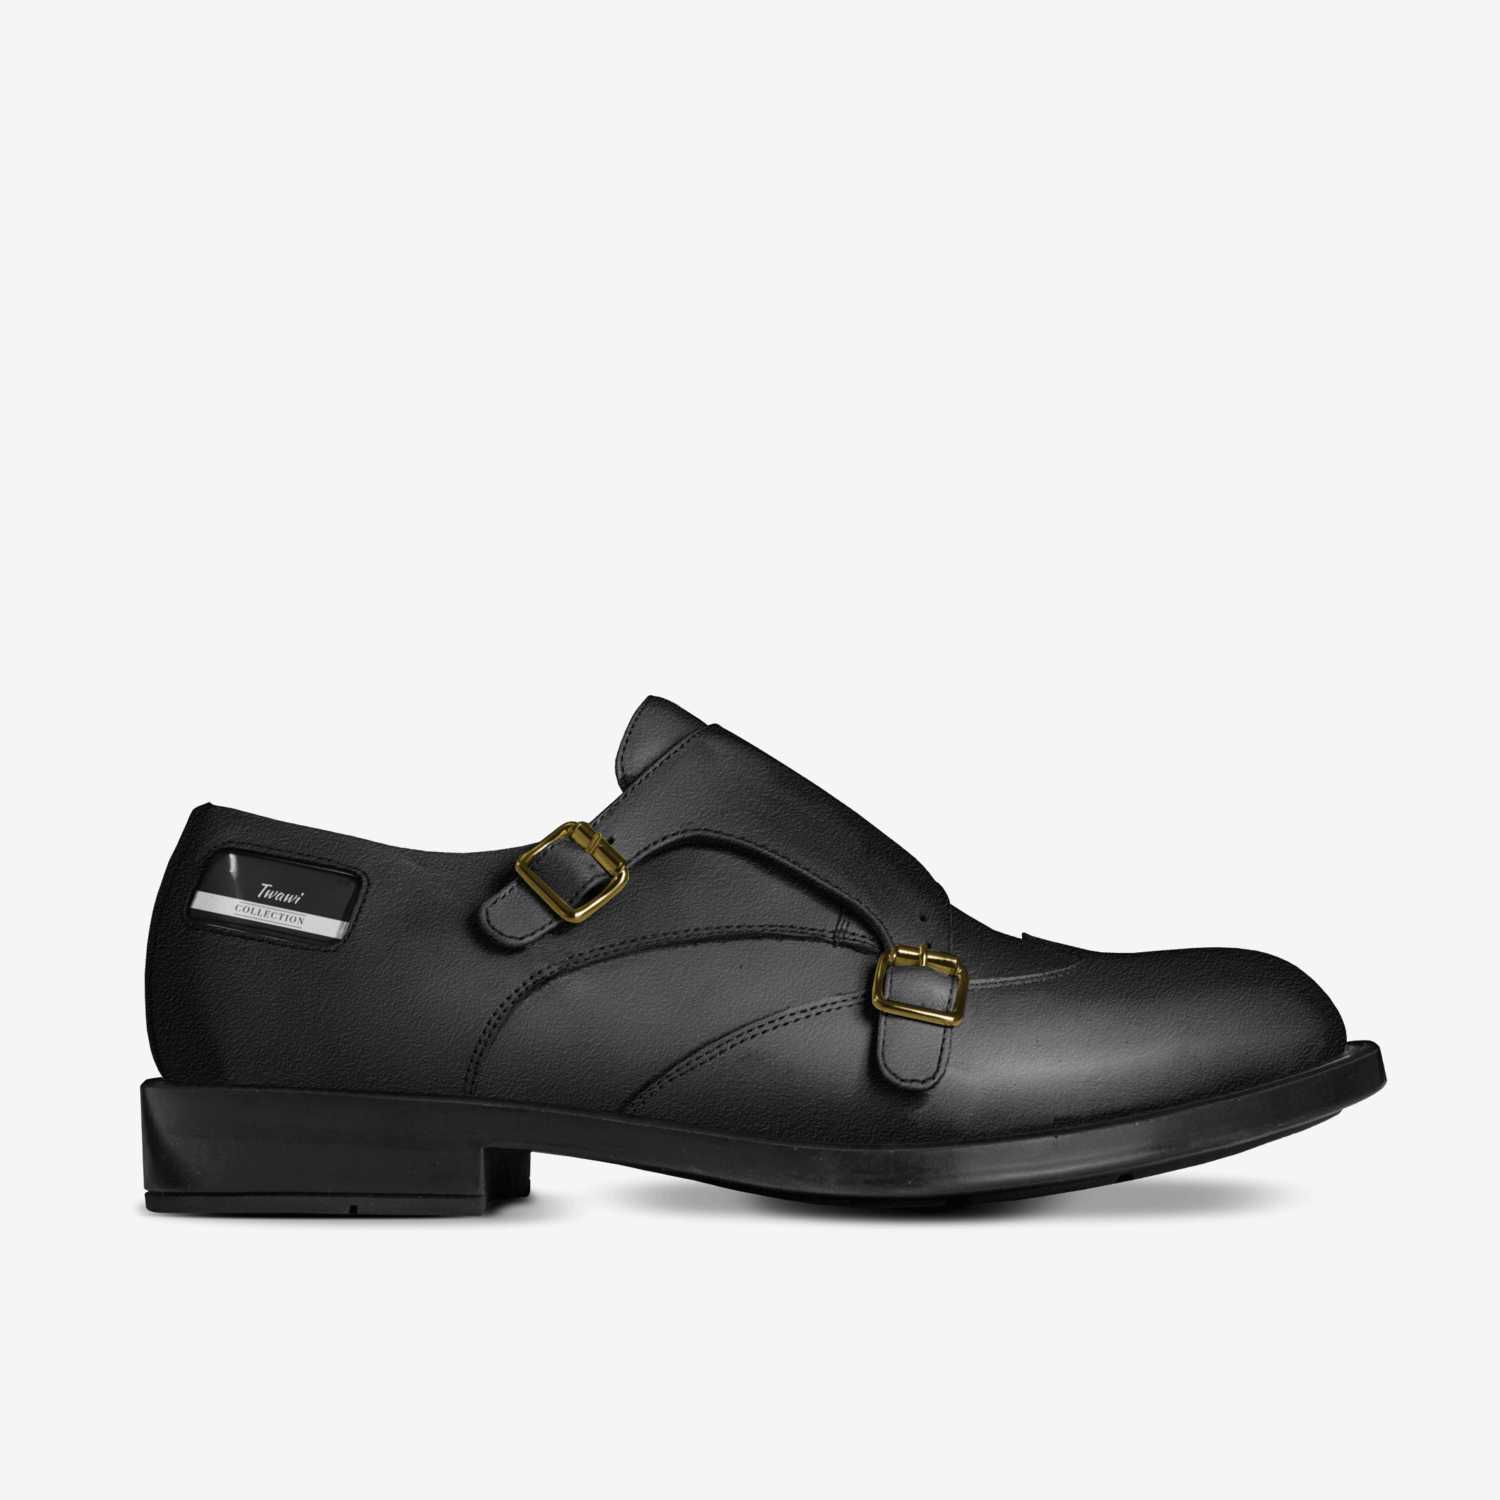 Twawi custom made in Italy shoes by Tyrone Martin | Side view